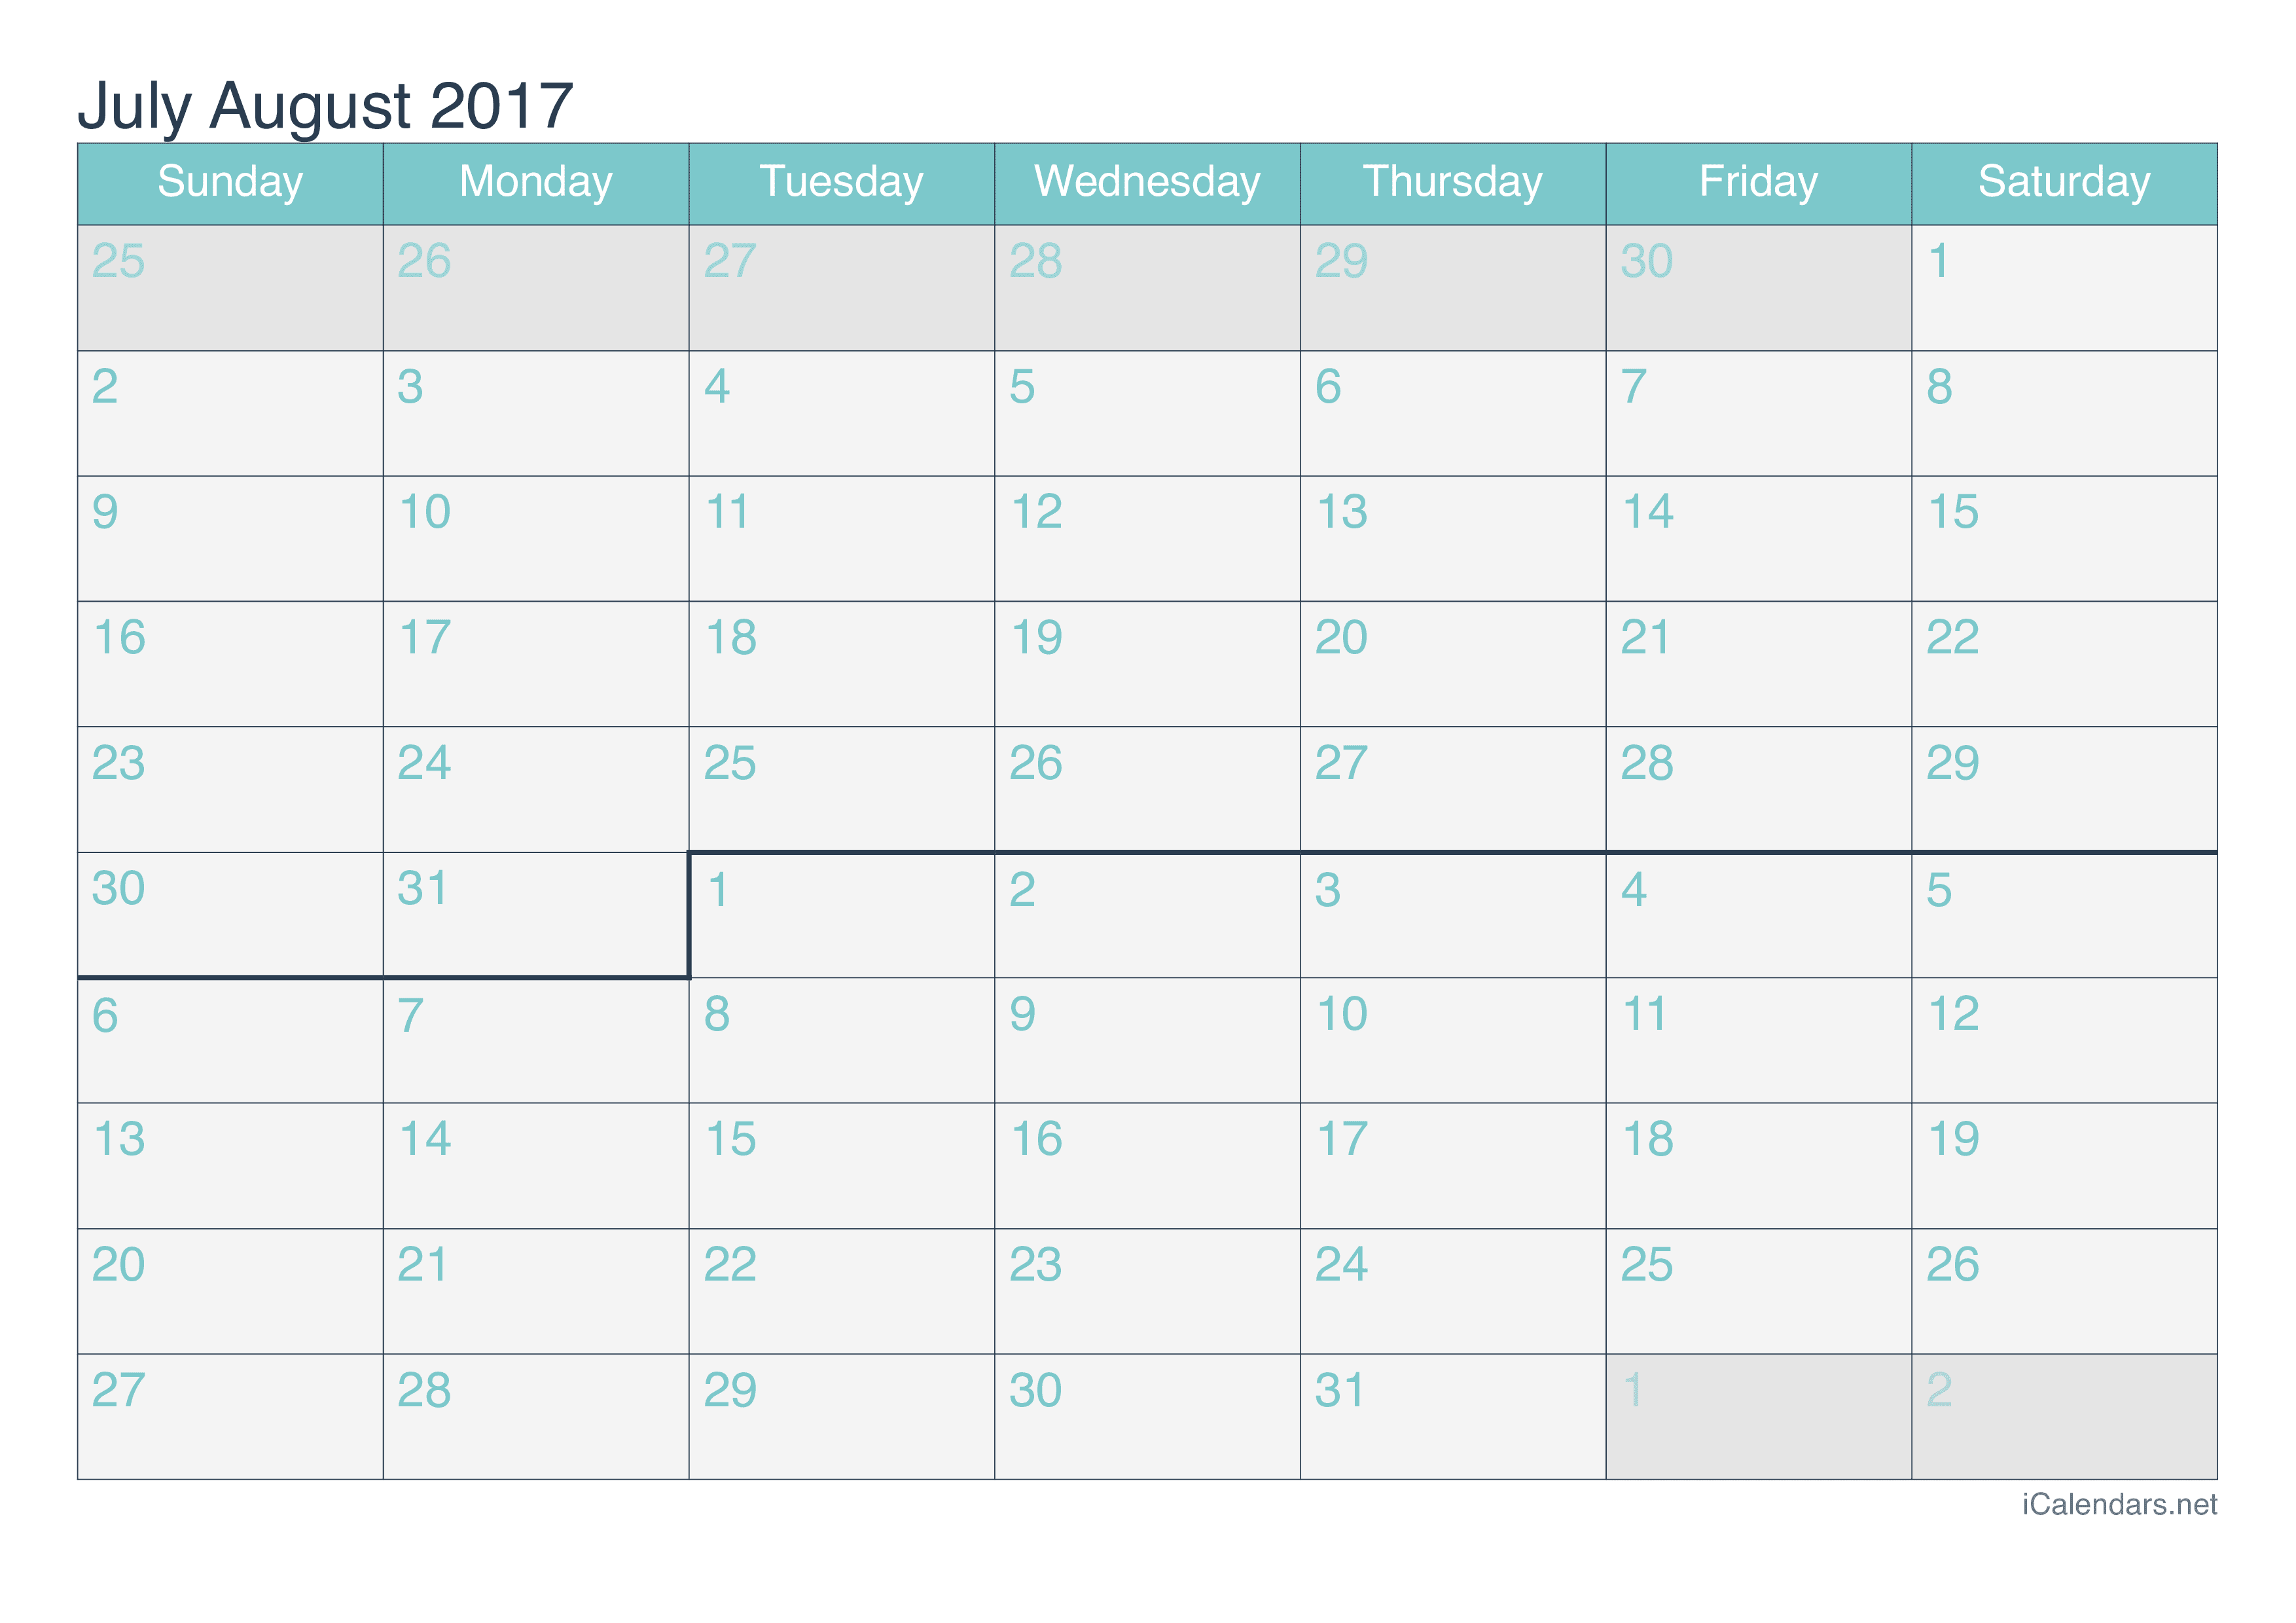 2017 July August Calendar - Turquoise